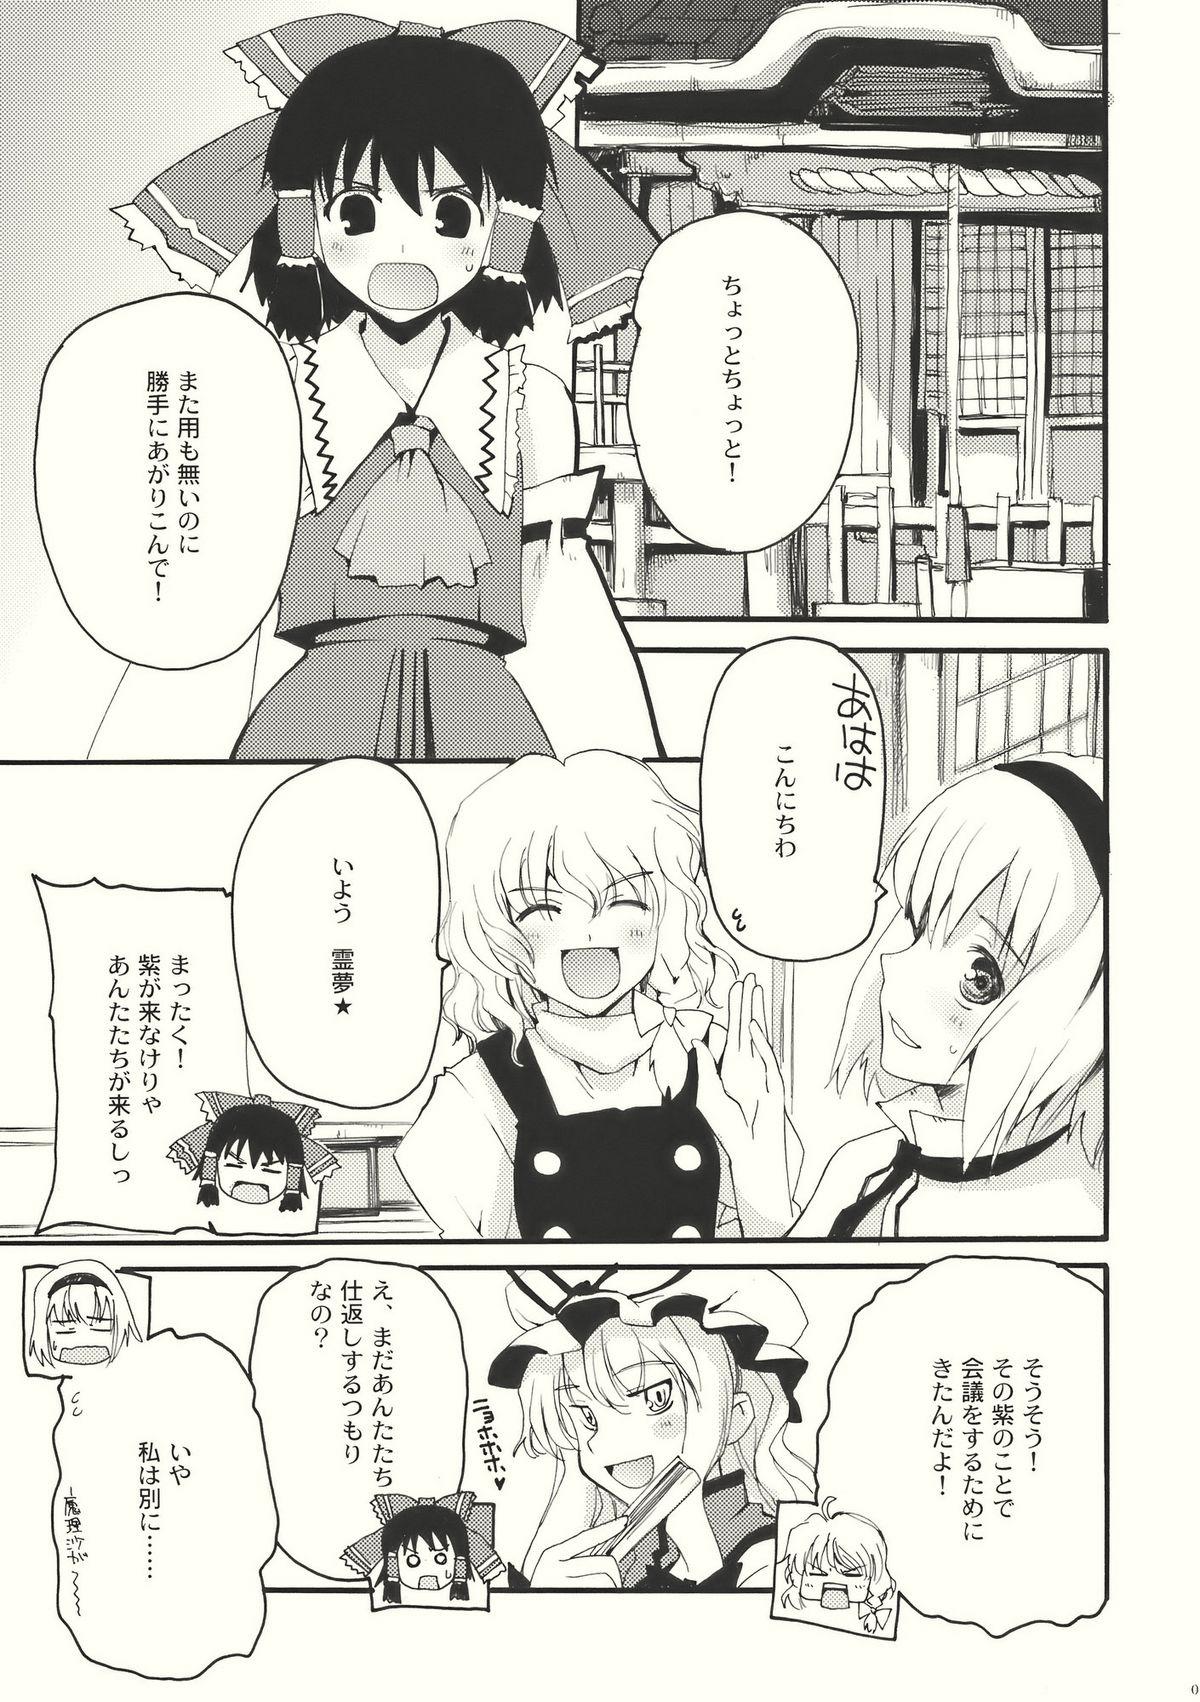 Chichona Let Me Take You Home Tonight! 2 - Touhou project Tit - Page 5